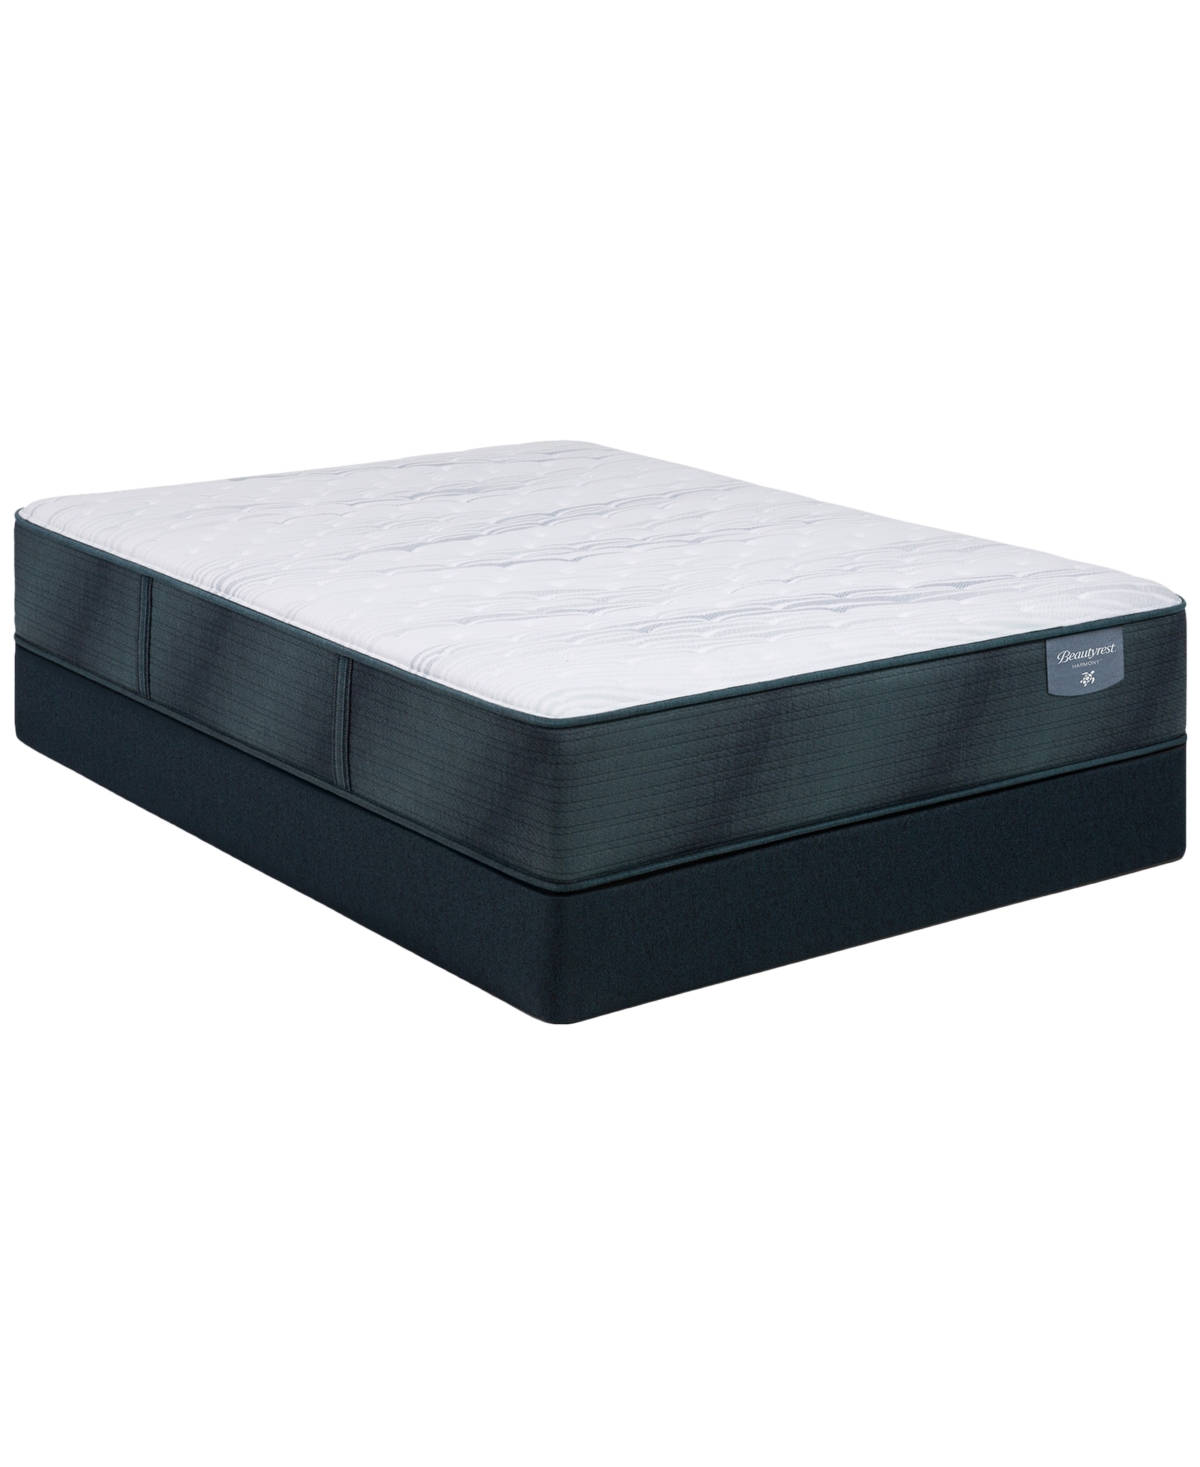 Shop Beautyrest Harmony Cypress Bay 12" Extra Firm Mattress In No Color